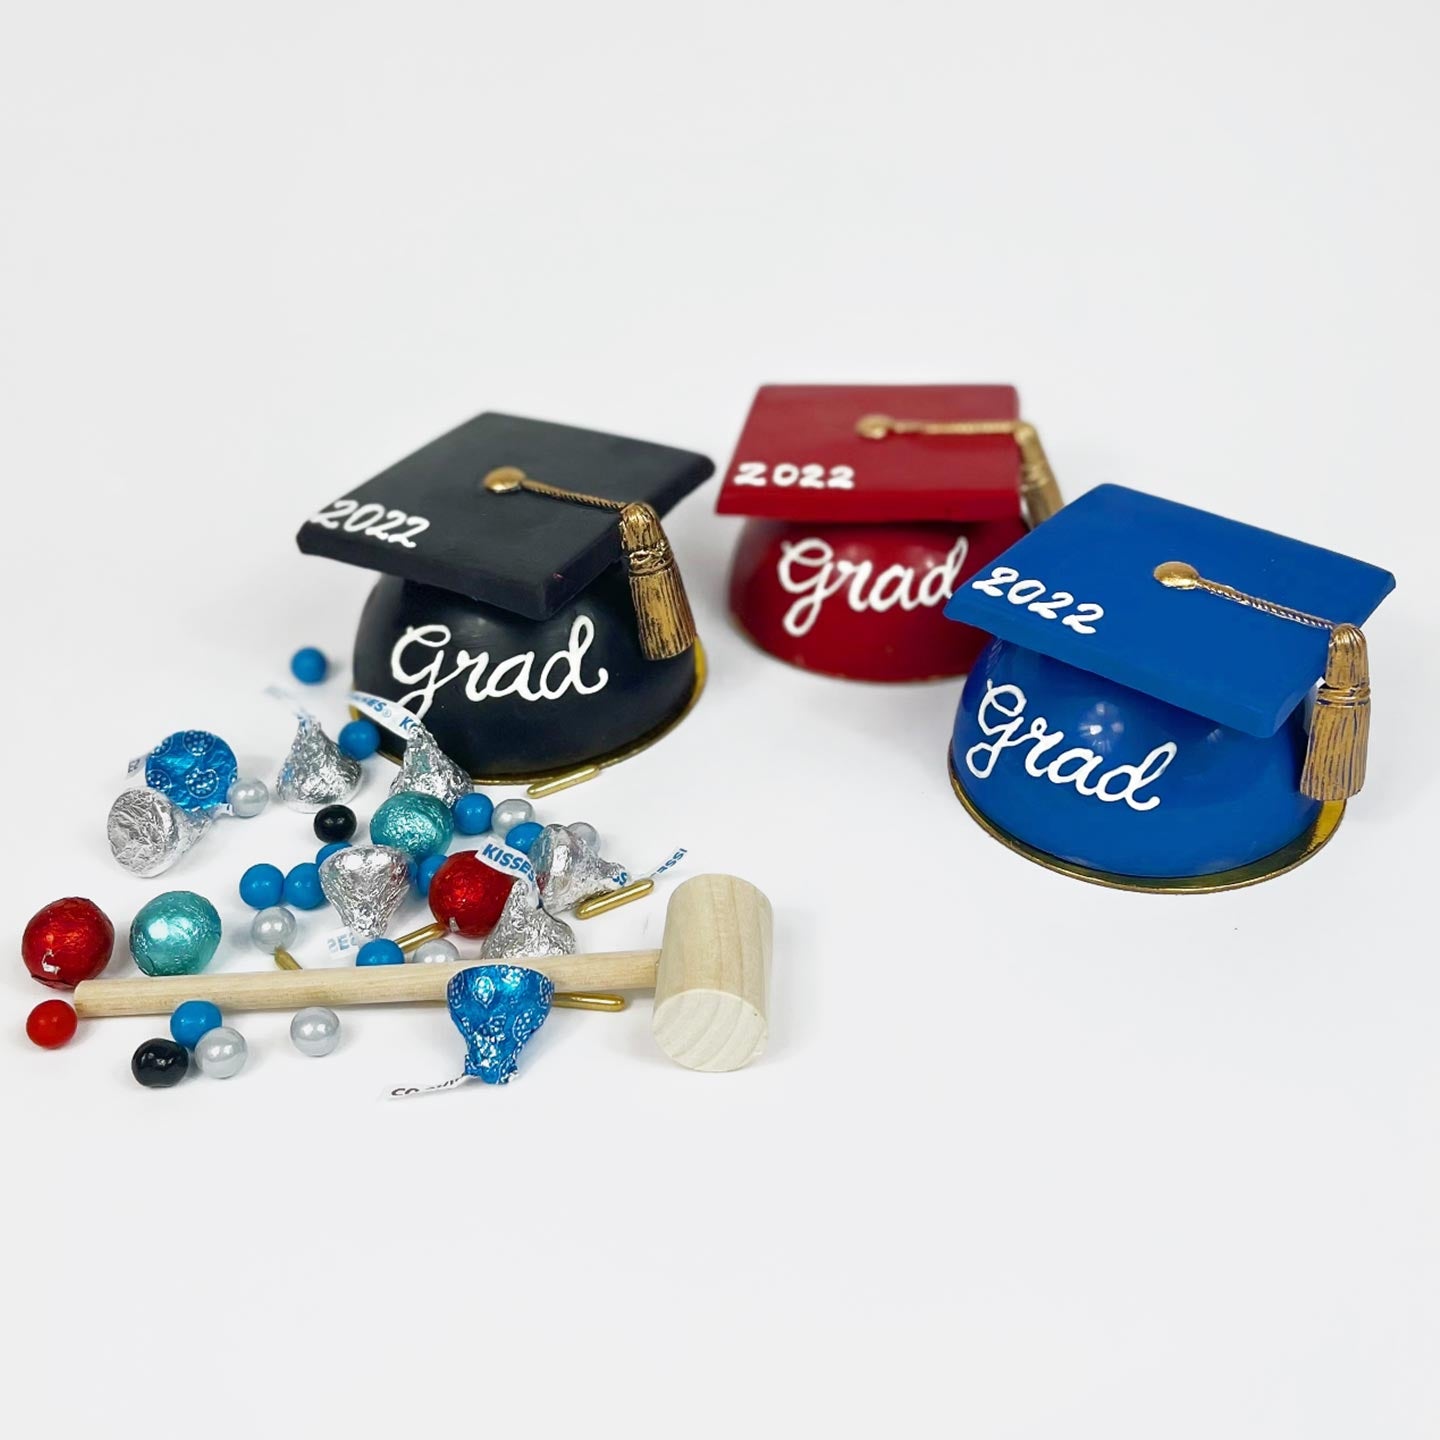 Three chocolate graduation caps in black, red, and blue. Each graduation cap includes assorted candies on the inside. The assorted candy and a mallot are shown on the outside.